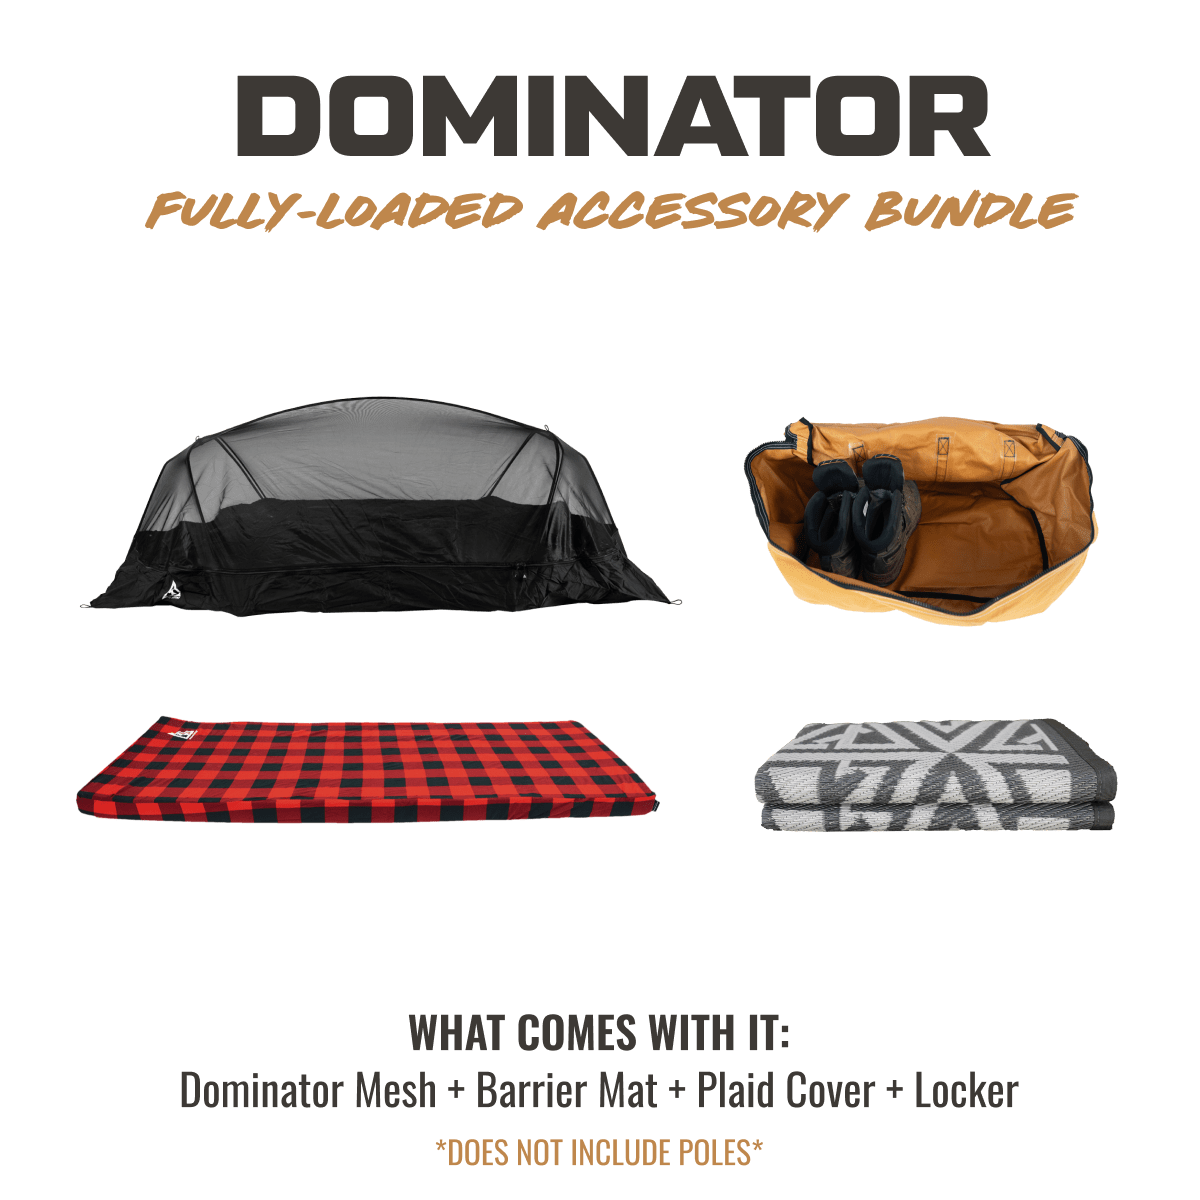 Fully-Loaded Accessories Bundle